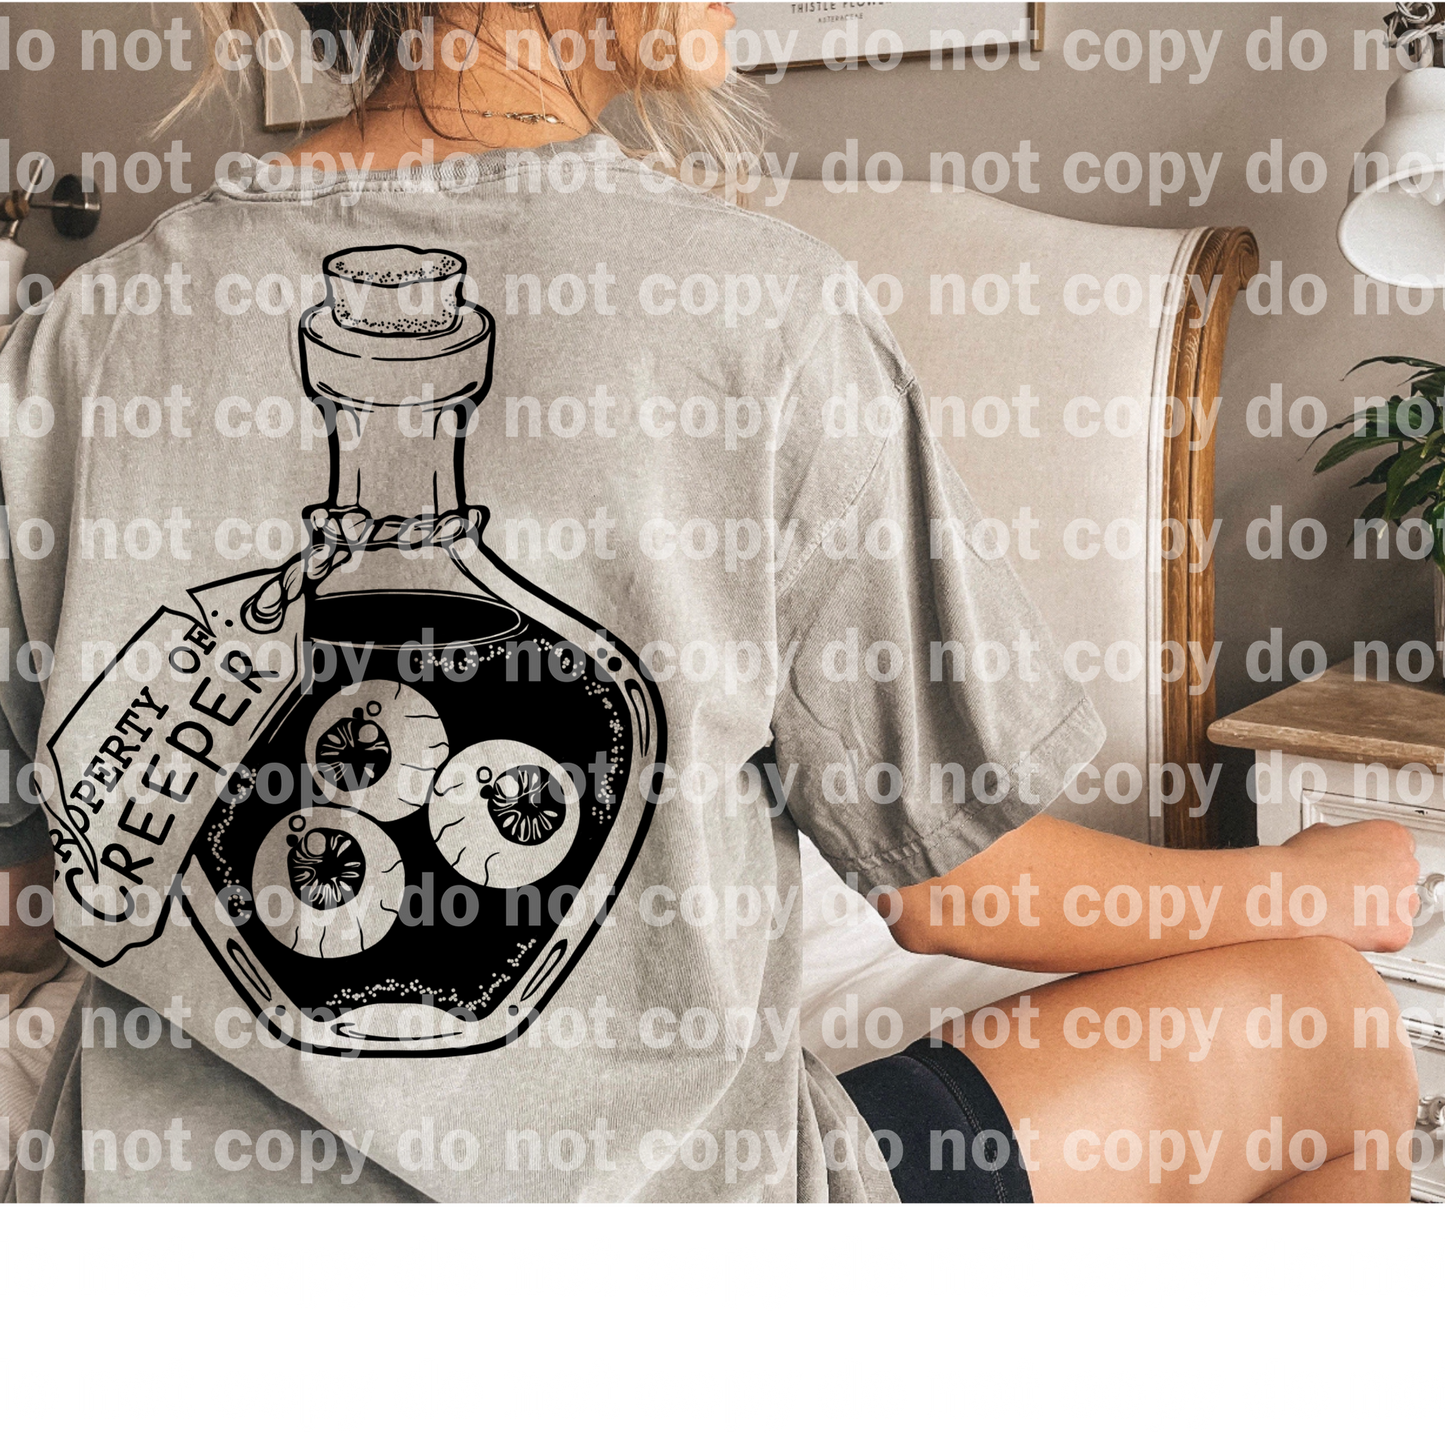 Property Of Creeper Eye Balls Color Full Color/One Color Dream Print or Sublimation Print